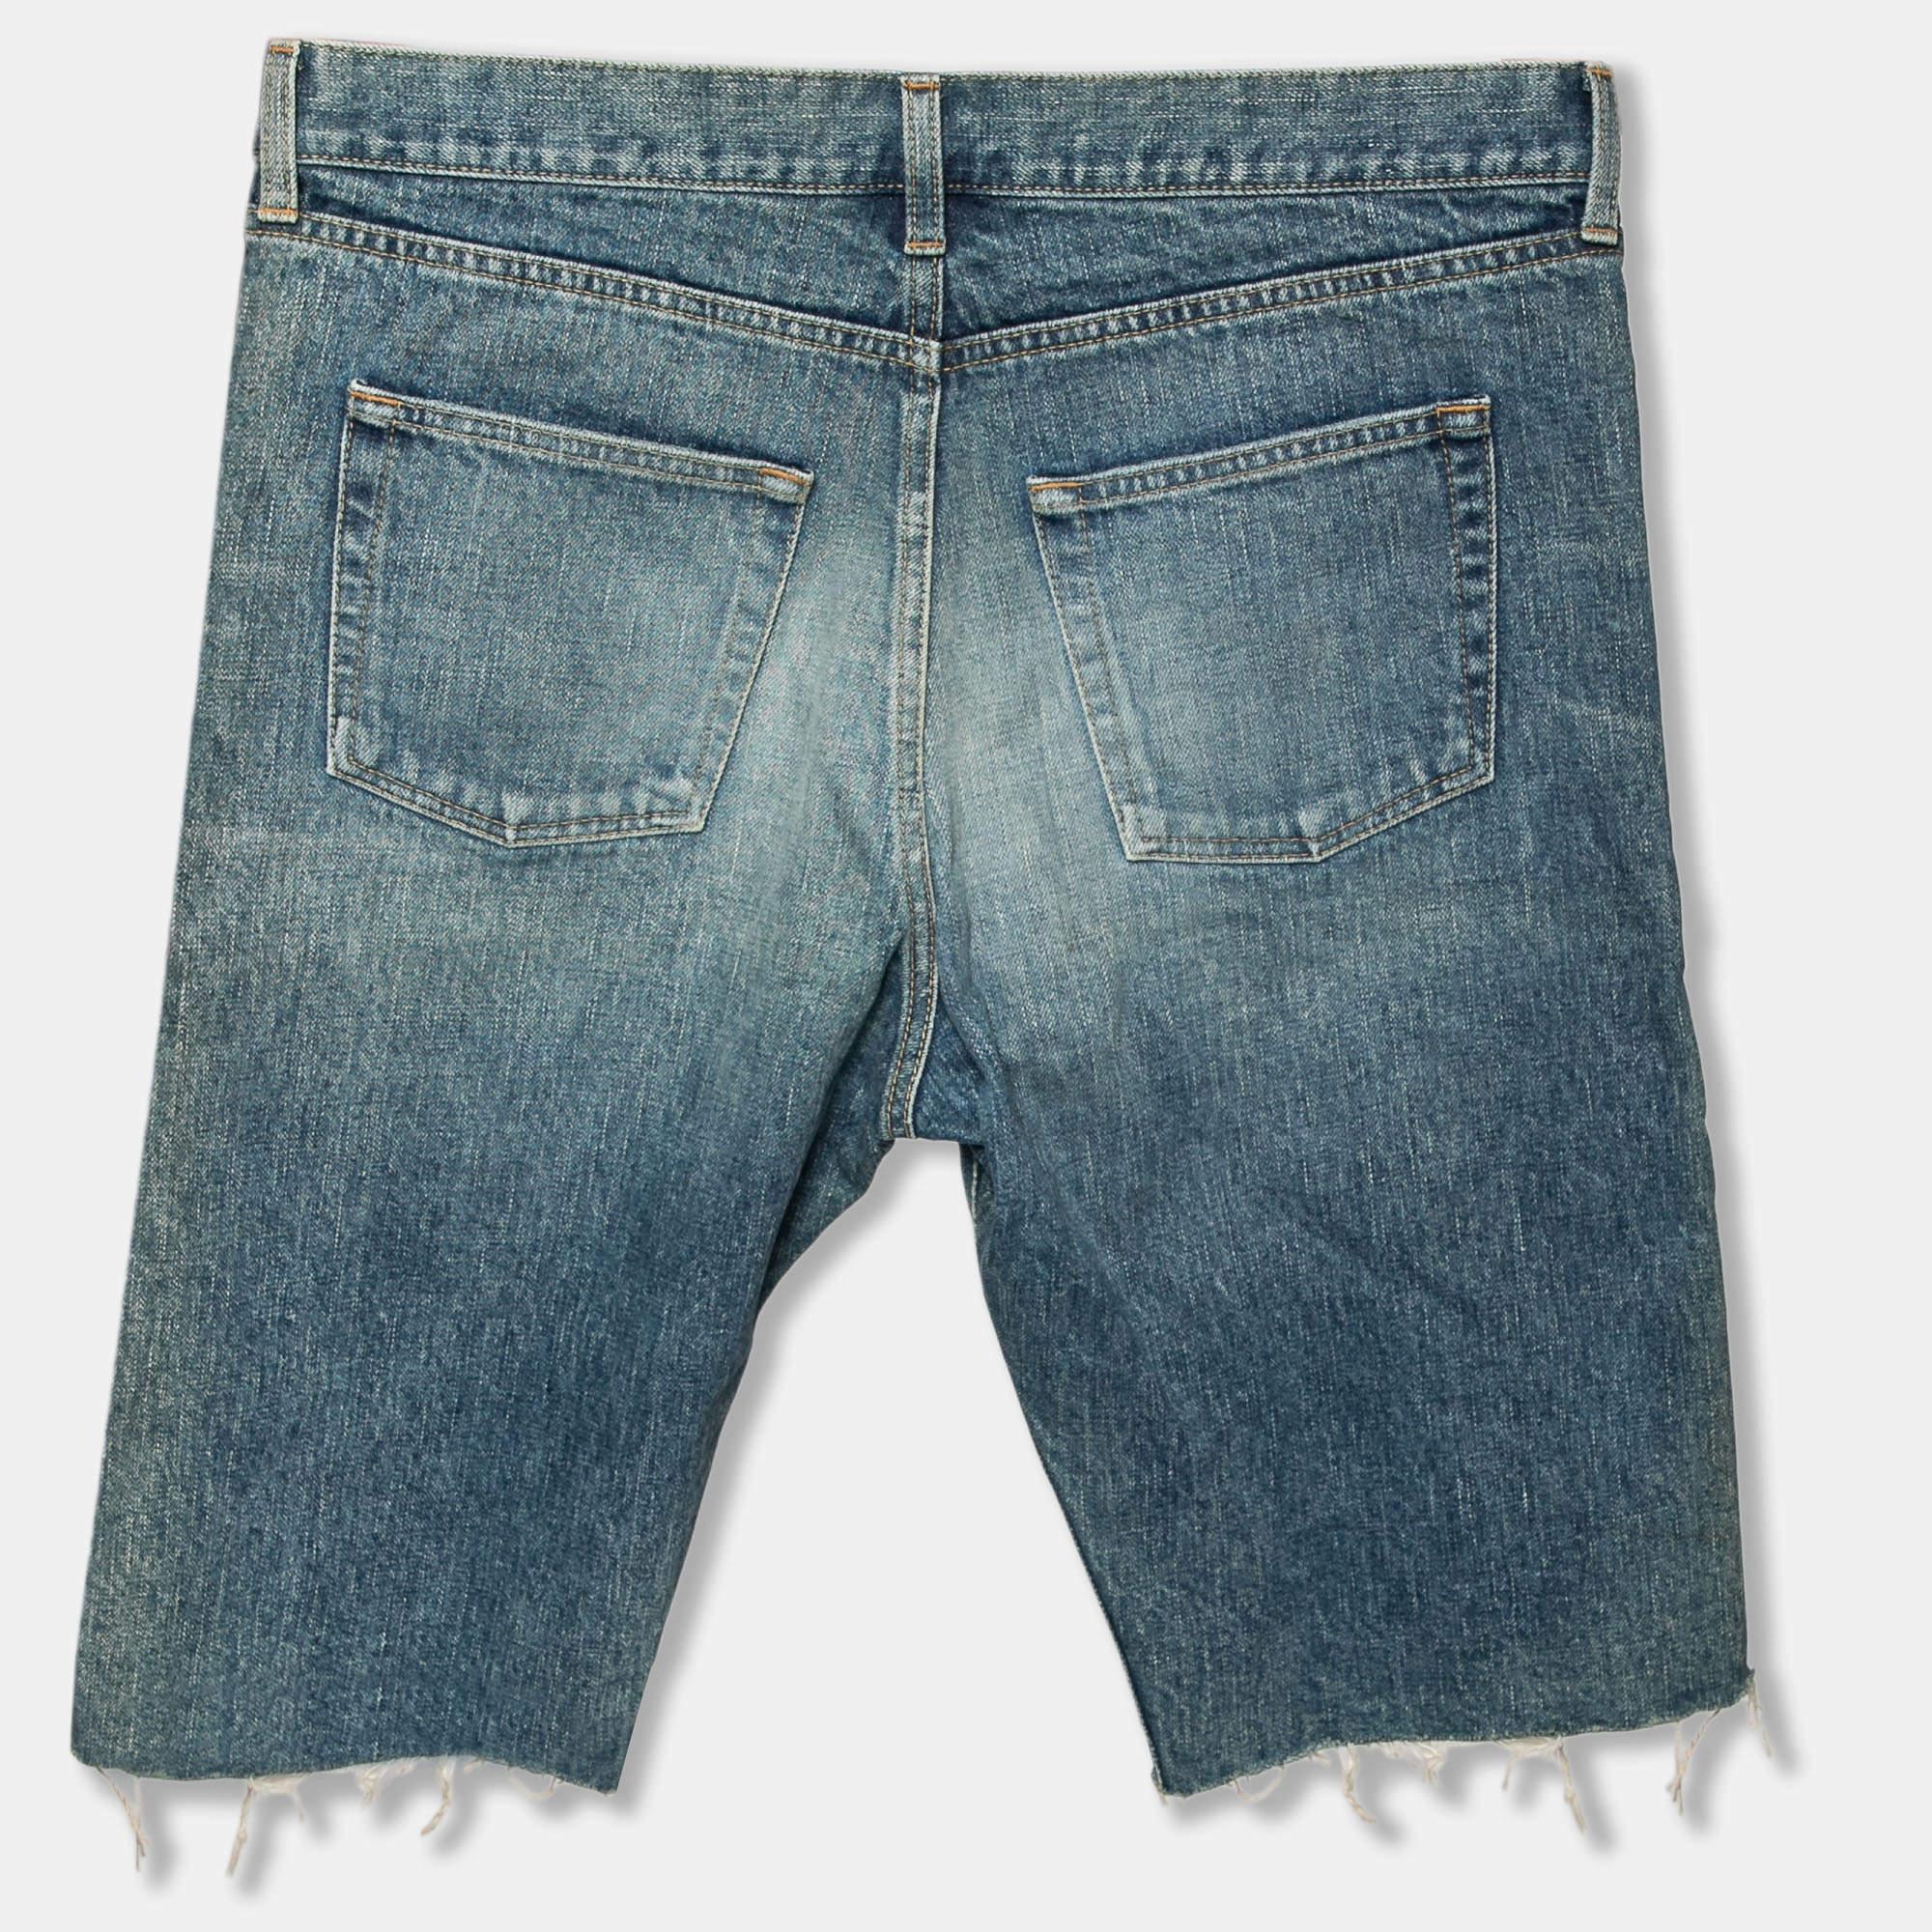 These Capri shorts from Saint Laurent are a closet essential. They are tailored from blue distressed denim fabric and feature a buttoned closure on the front. These shorts accommodate five external pockets and are great for casual outings.

